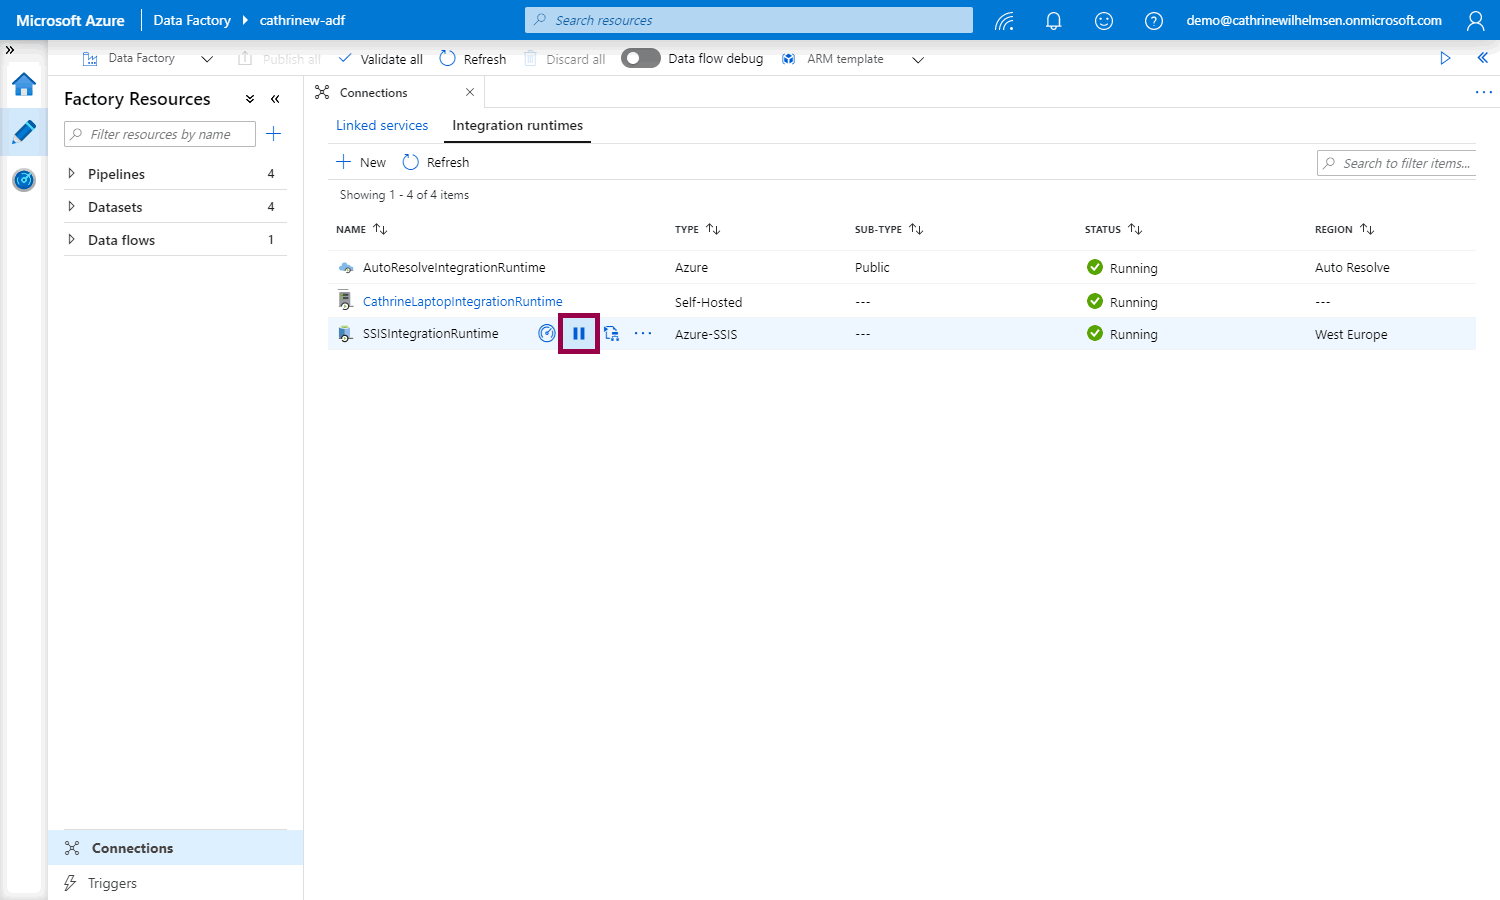 Screenshot of the Azure Data Factory interface with the integration runtimes open, highlighting the stop button for the Azure-SSIS integration runtime